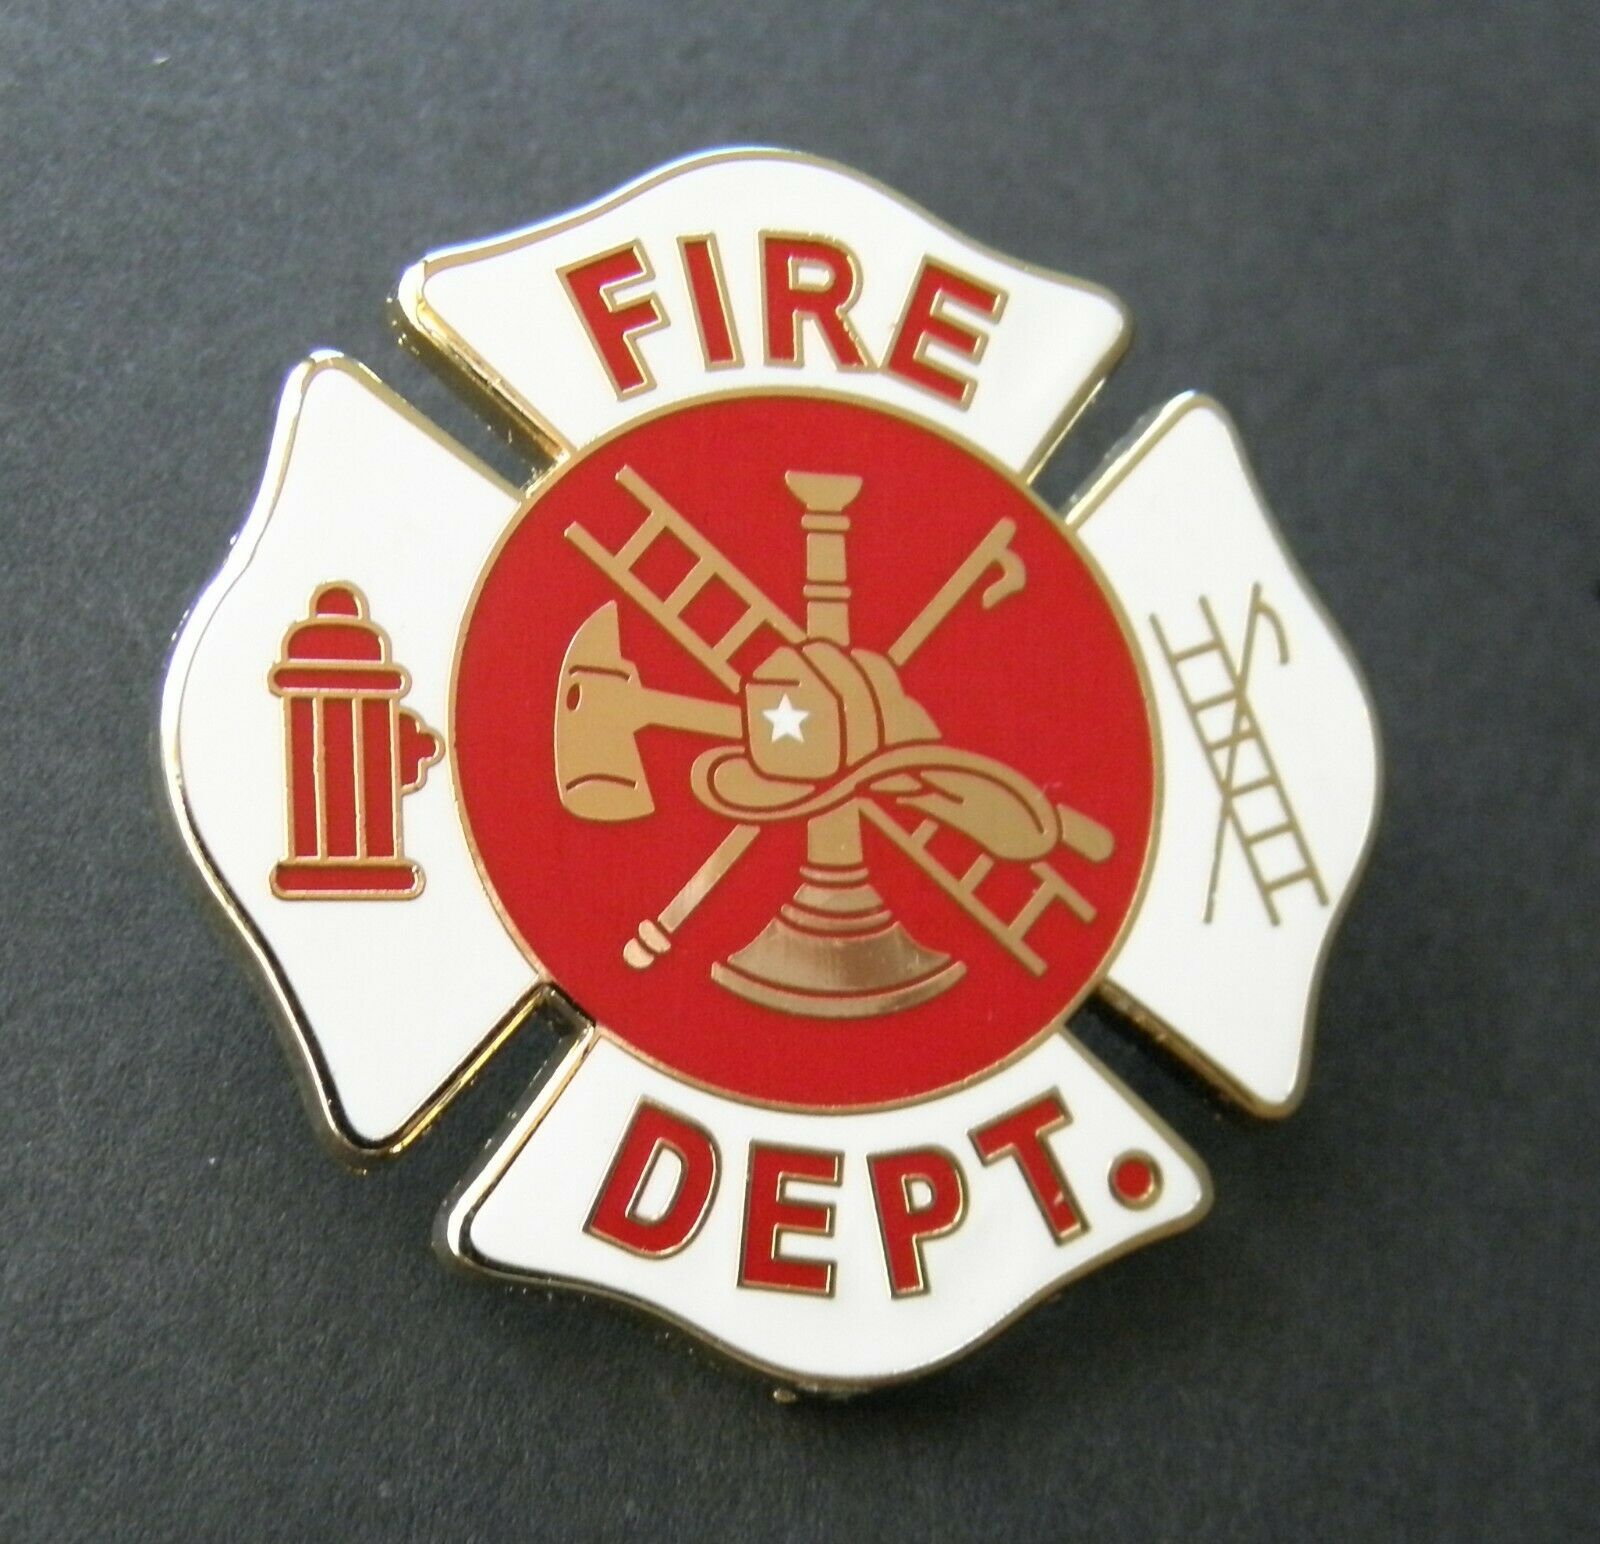 RED CROSS EMERGENCY MEDICAL CARE FIRST RESPONDER LAPEL PIN BADGE 1 INCH 